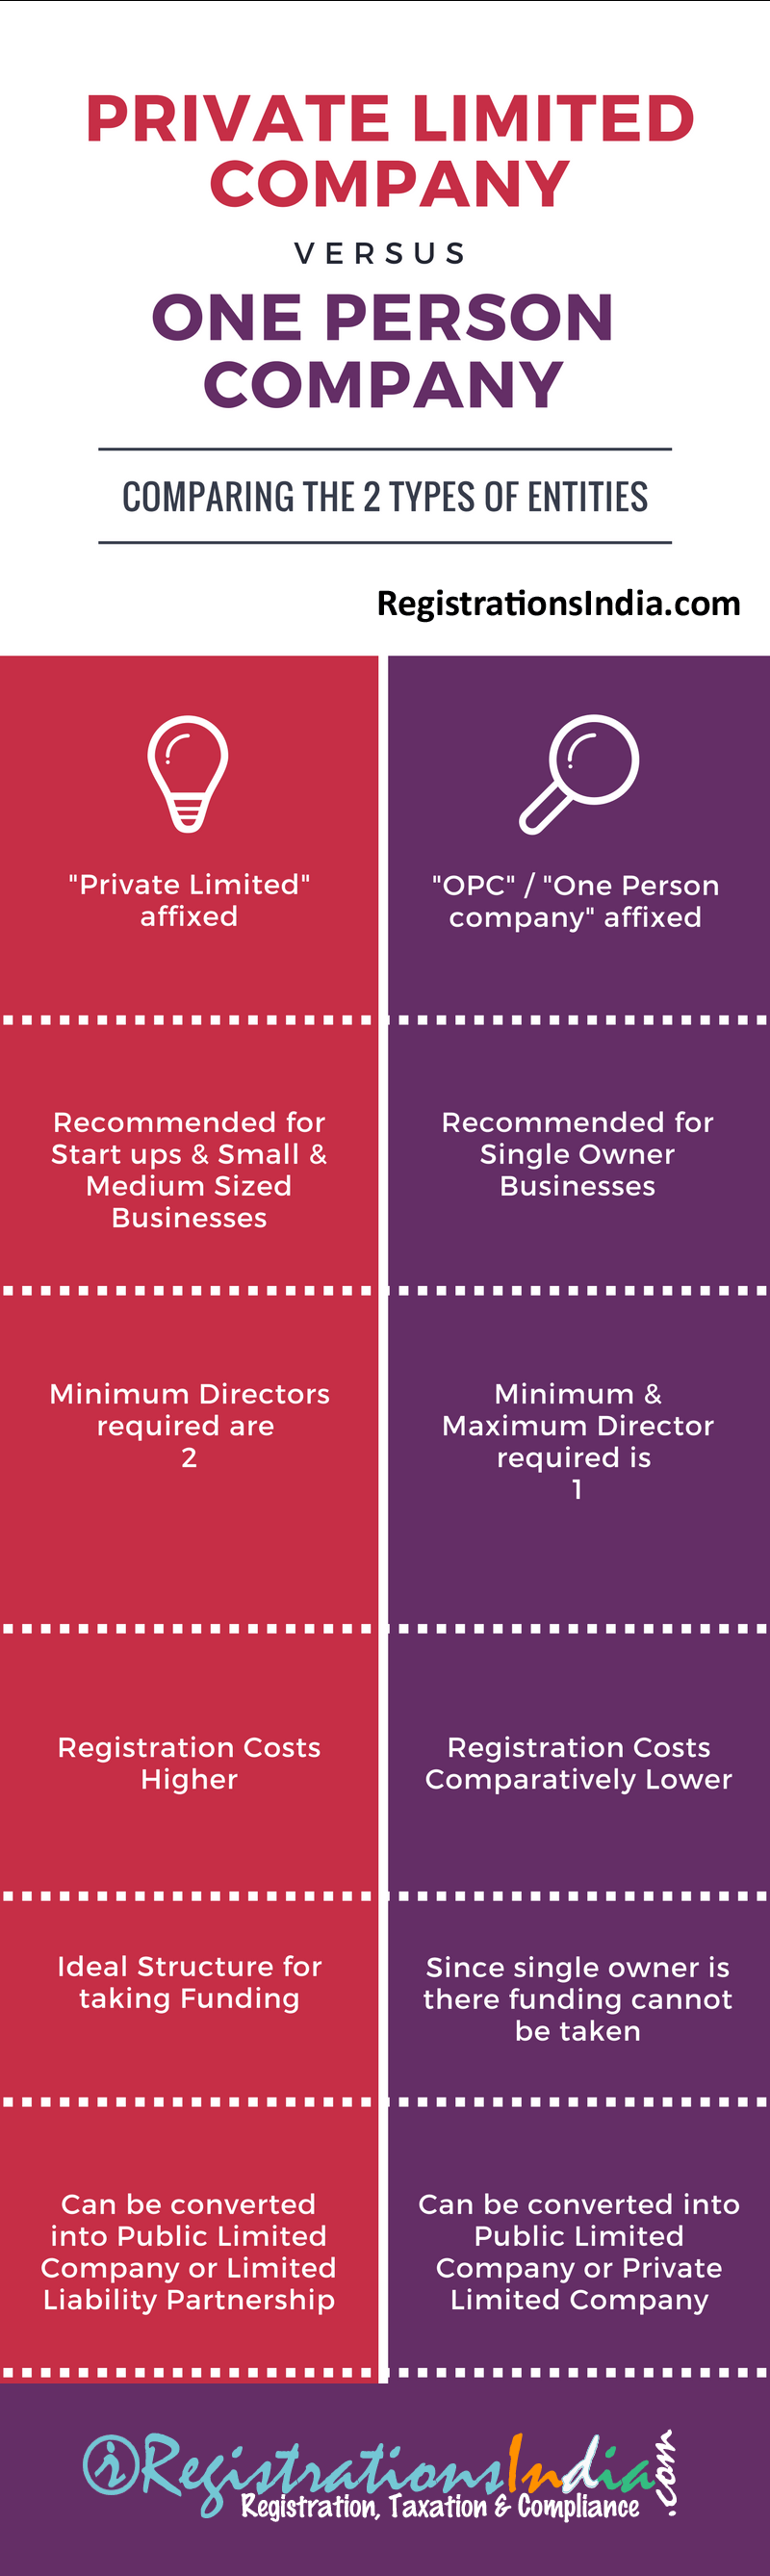 Differences between Private Limited Company and One Person Company infographic